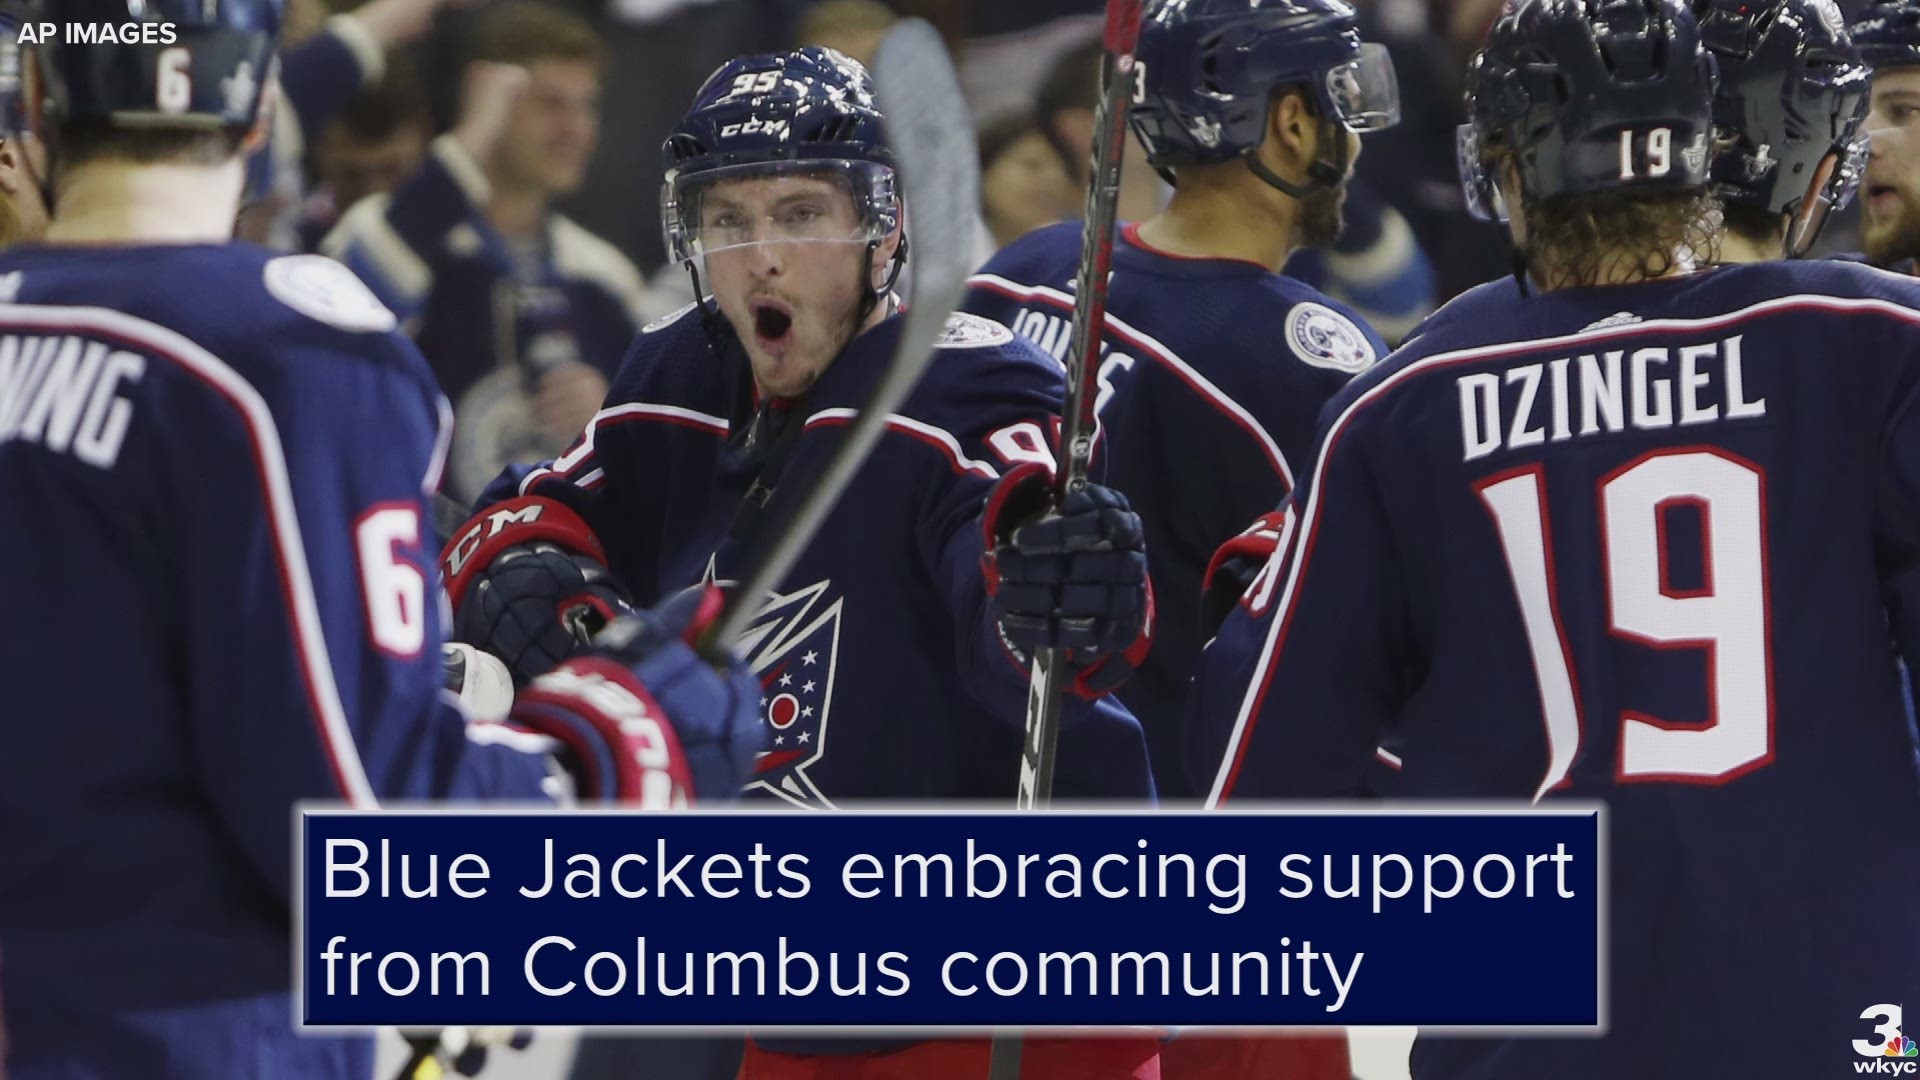 The Columbus Blue Jackets are embracing the support from fans and aim to give them more to cheer about during their Stanley Cup Playoffs run.